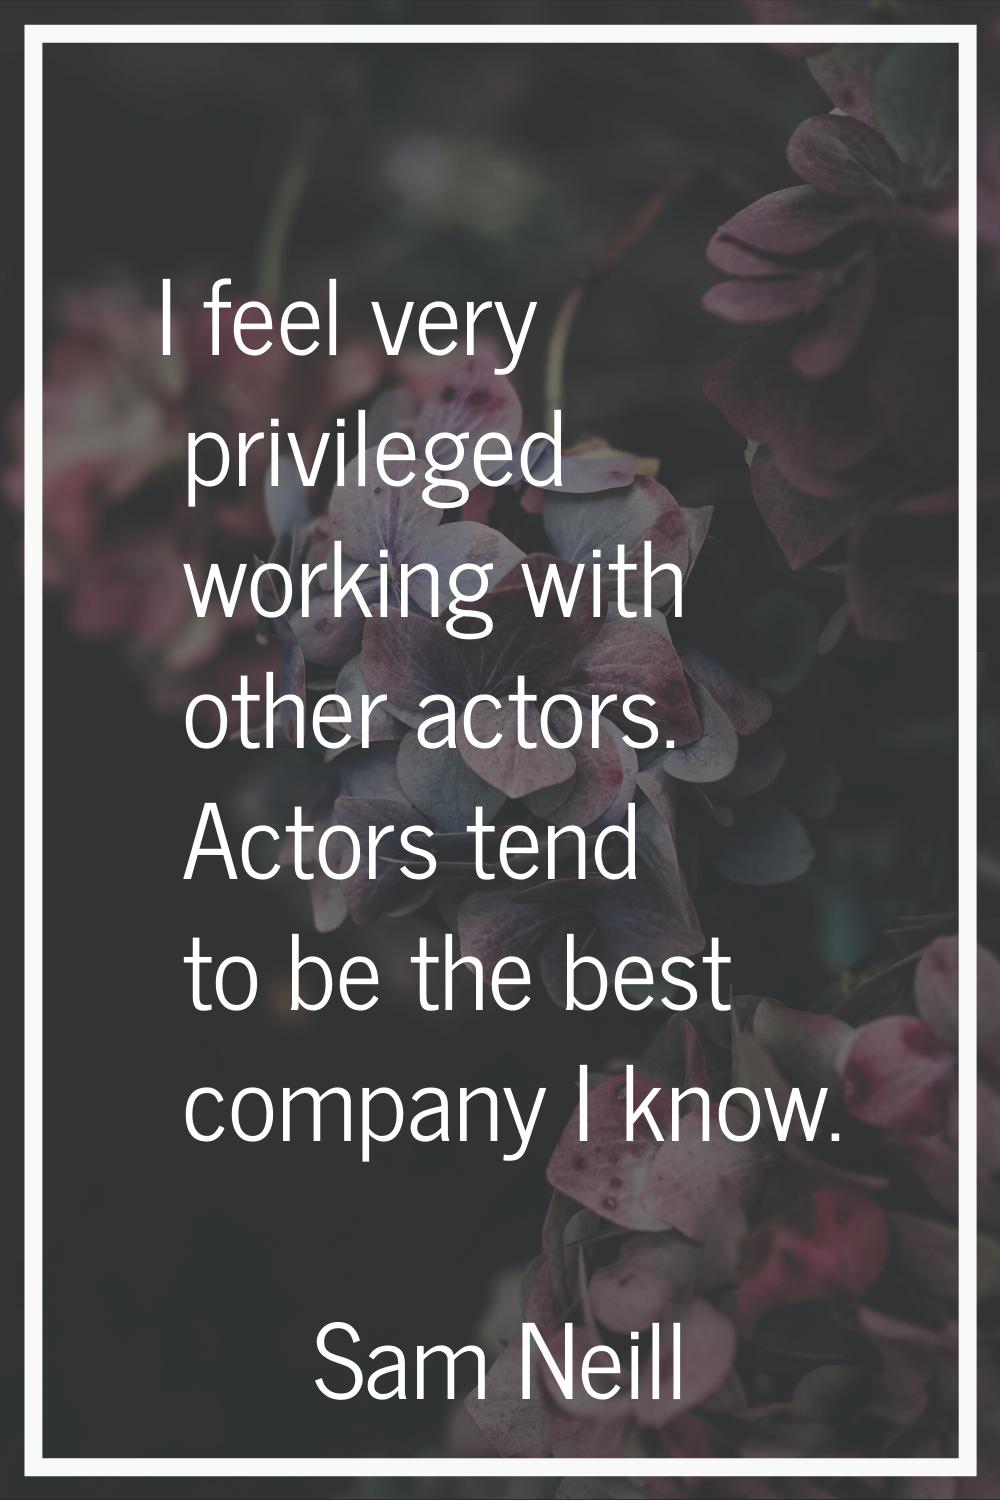 I feel very privileged working with other actors. Actors tend to be the best company I know.